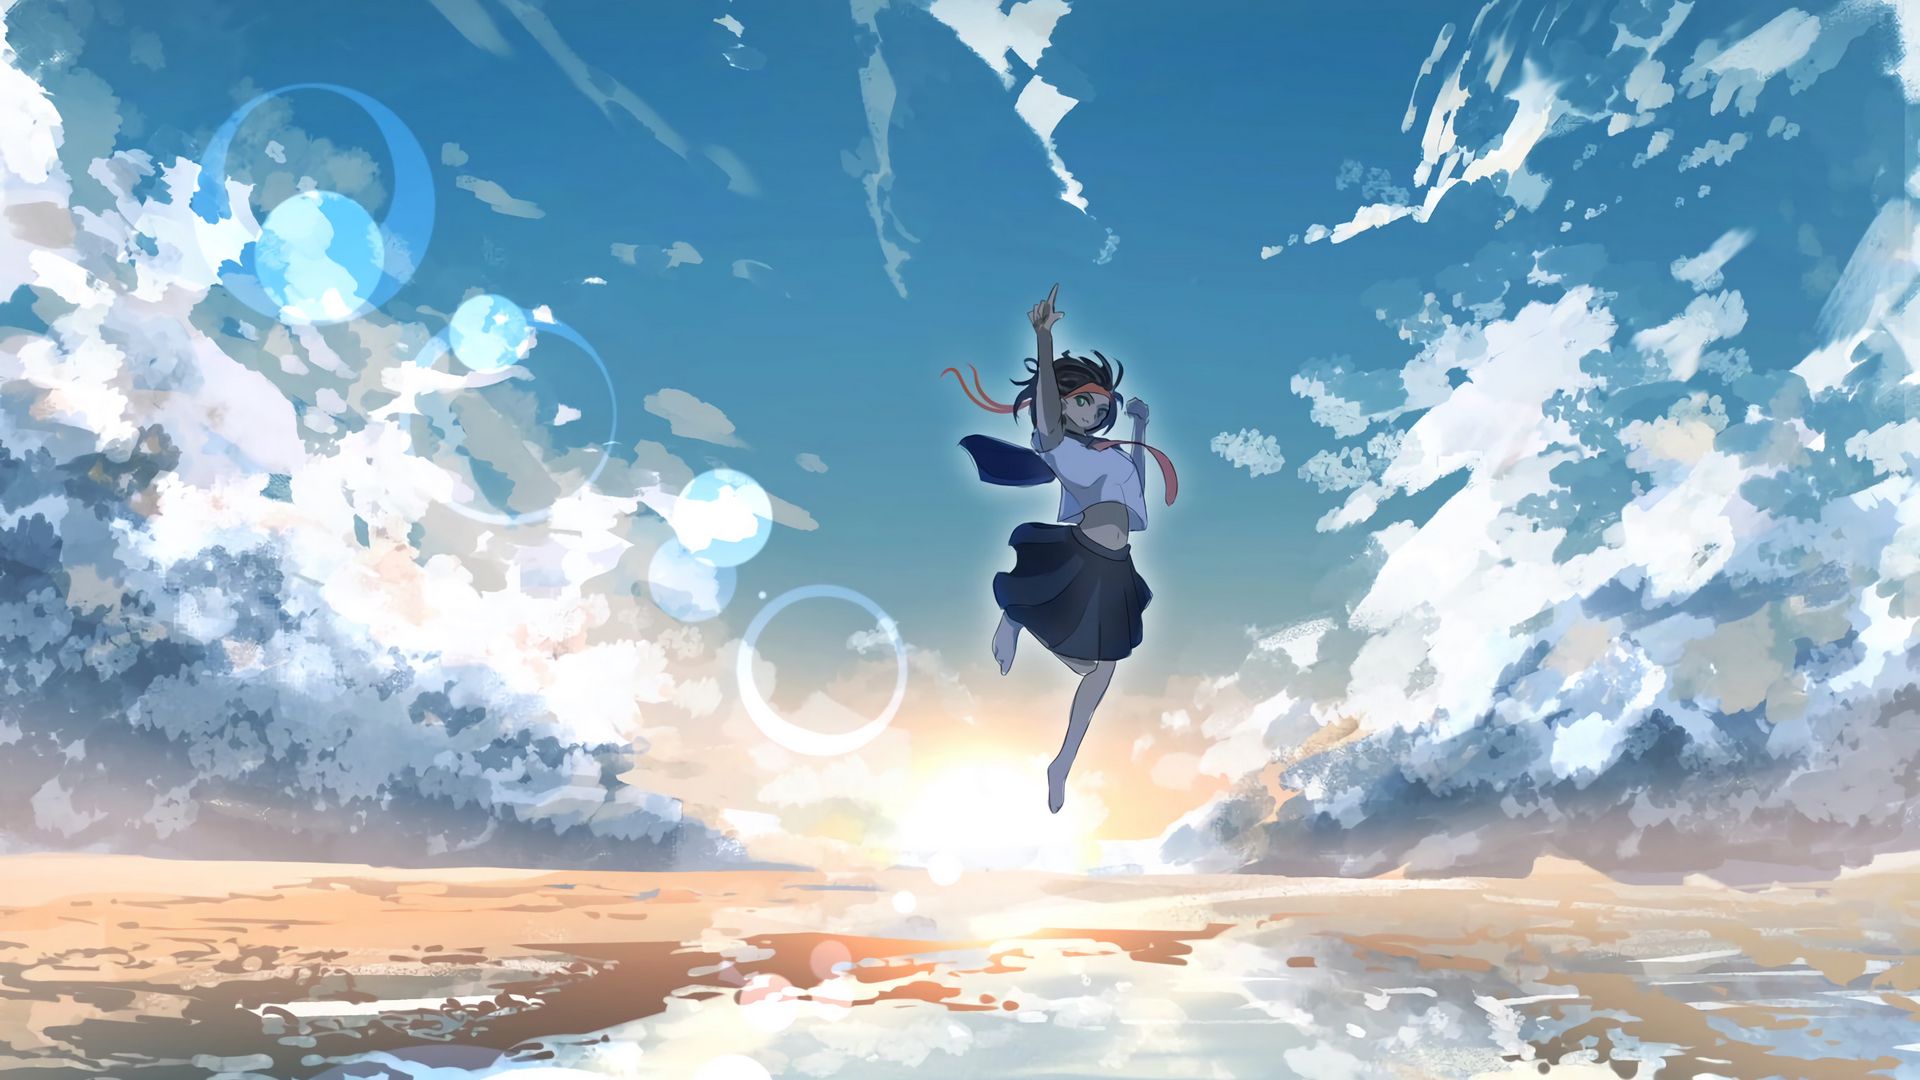 Download wallpaper 1920x1080 girl, jump, water, reflection, clouds ...